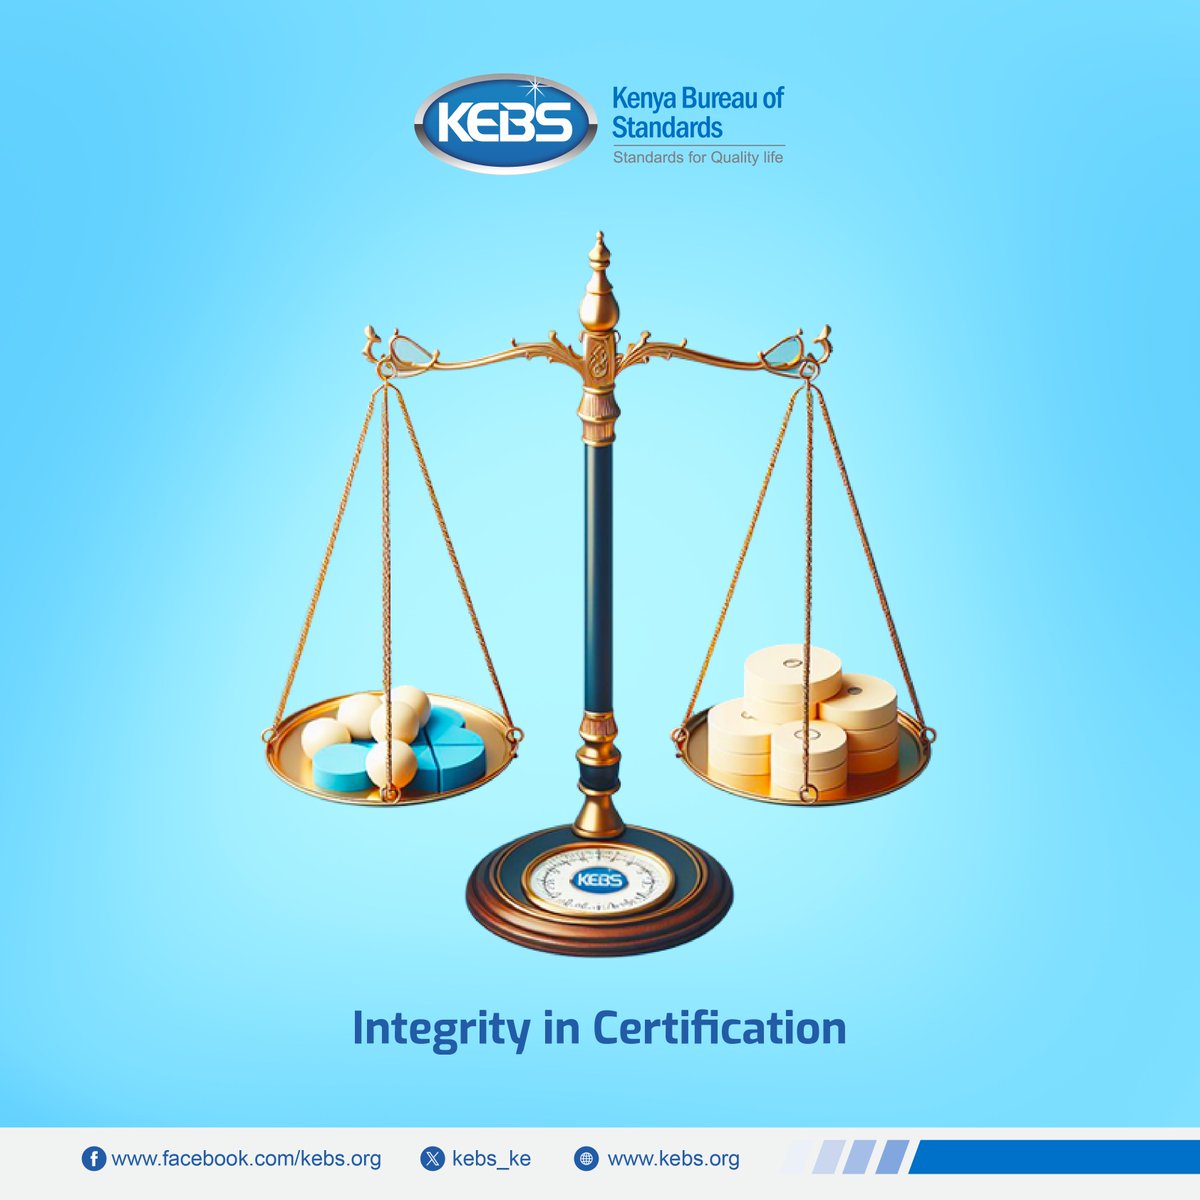 Our priority at @KEBS_ke is to uphold impartiality in all our certification initiatives. We place a strong emphasis on maintaining fairness and objectivity. #KEBSIntegrity #CertificationExcellence #SystemCertification #QualityMatters